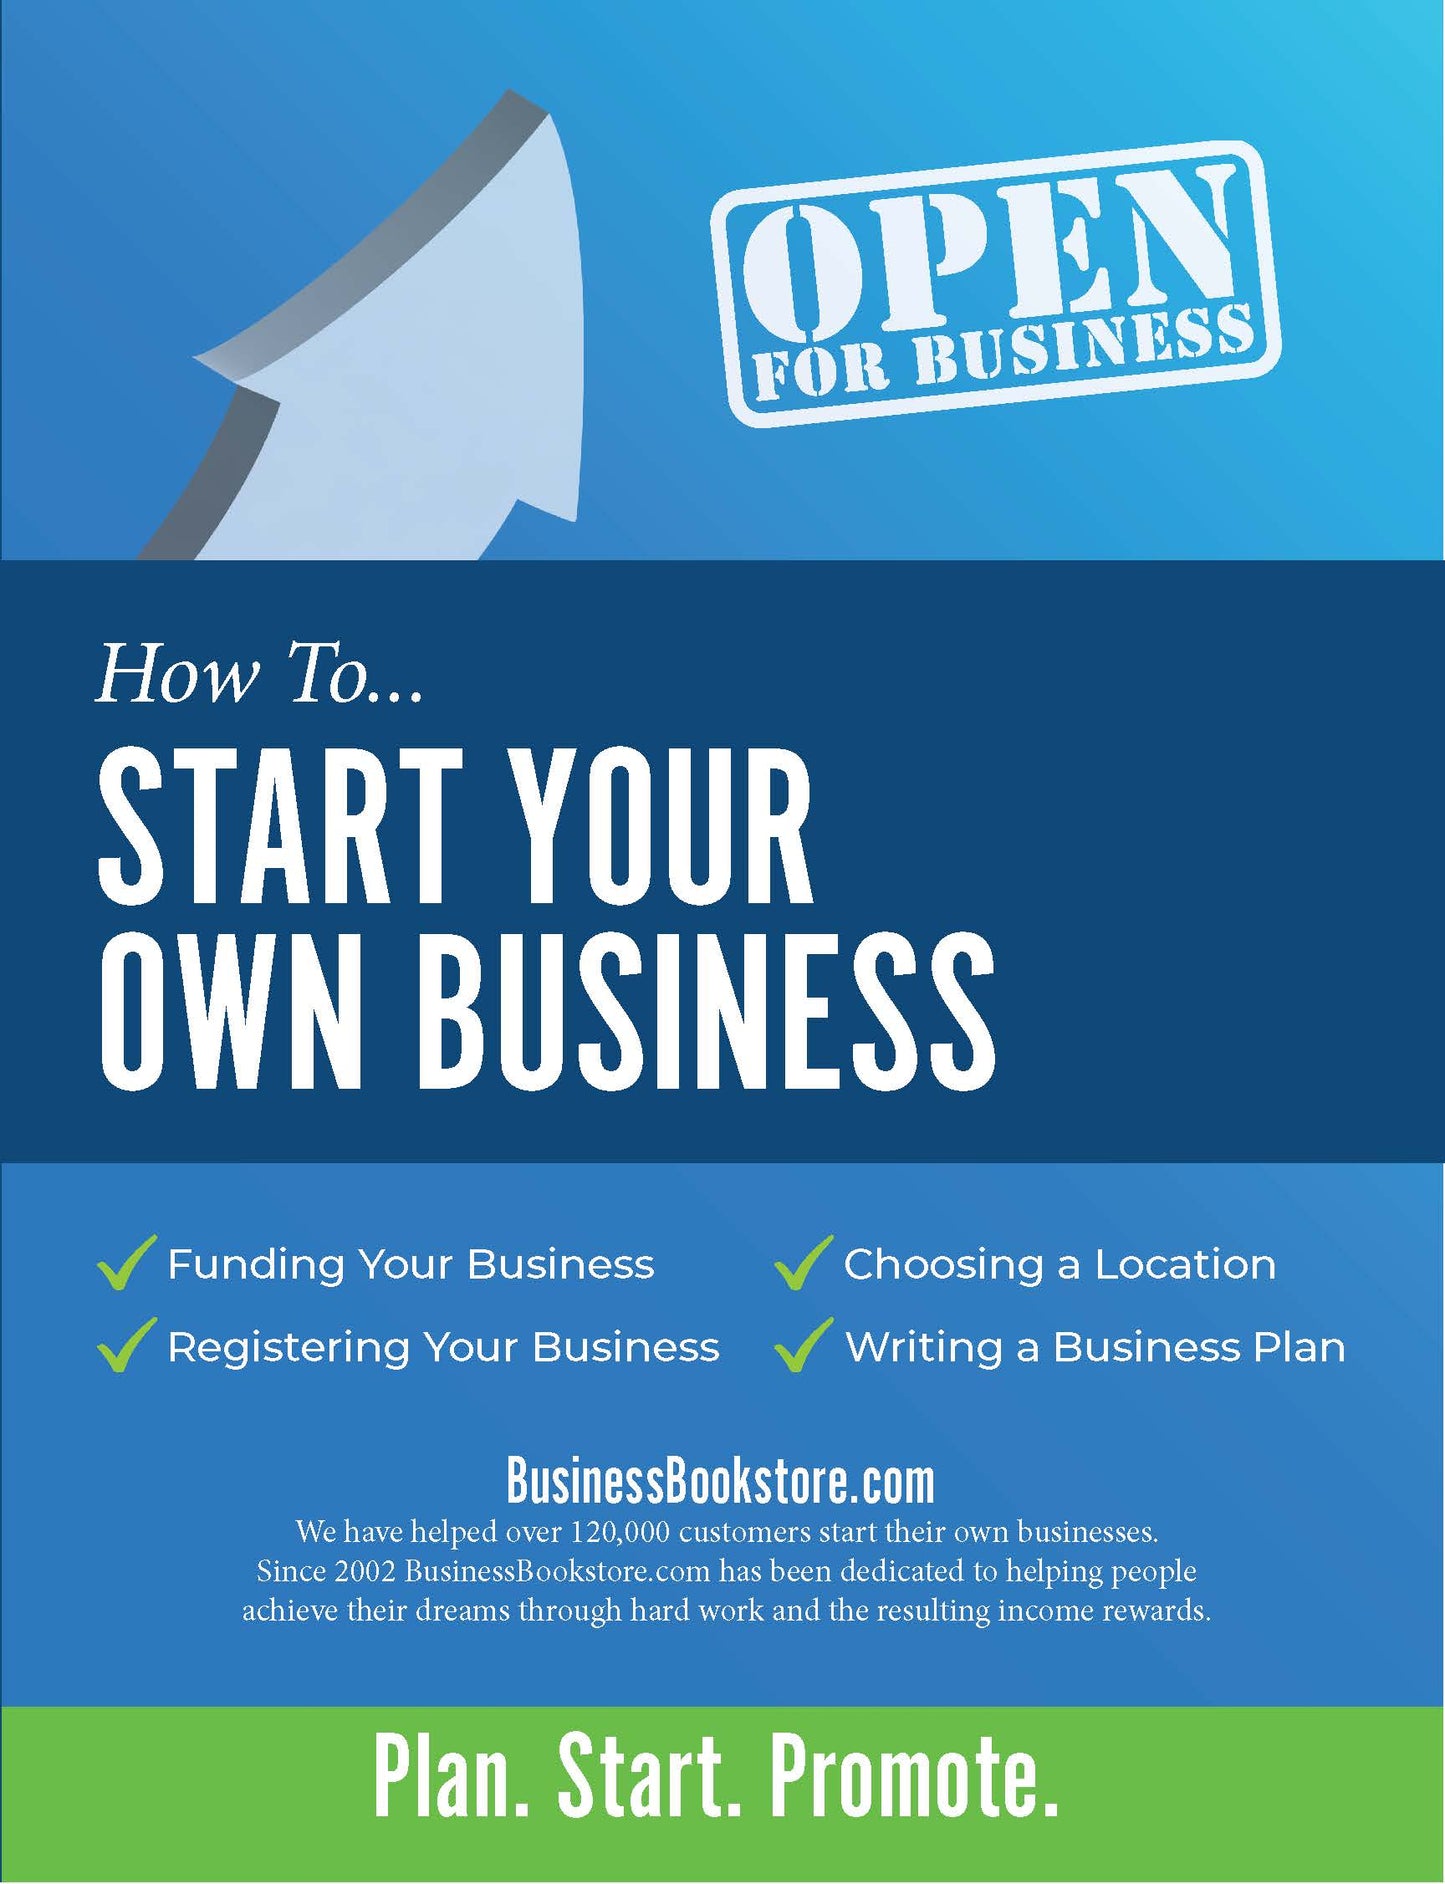 Business Startup Kit: From Vision to Profit